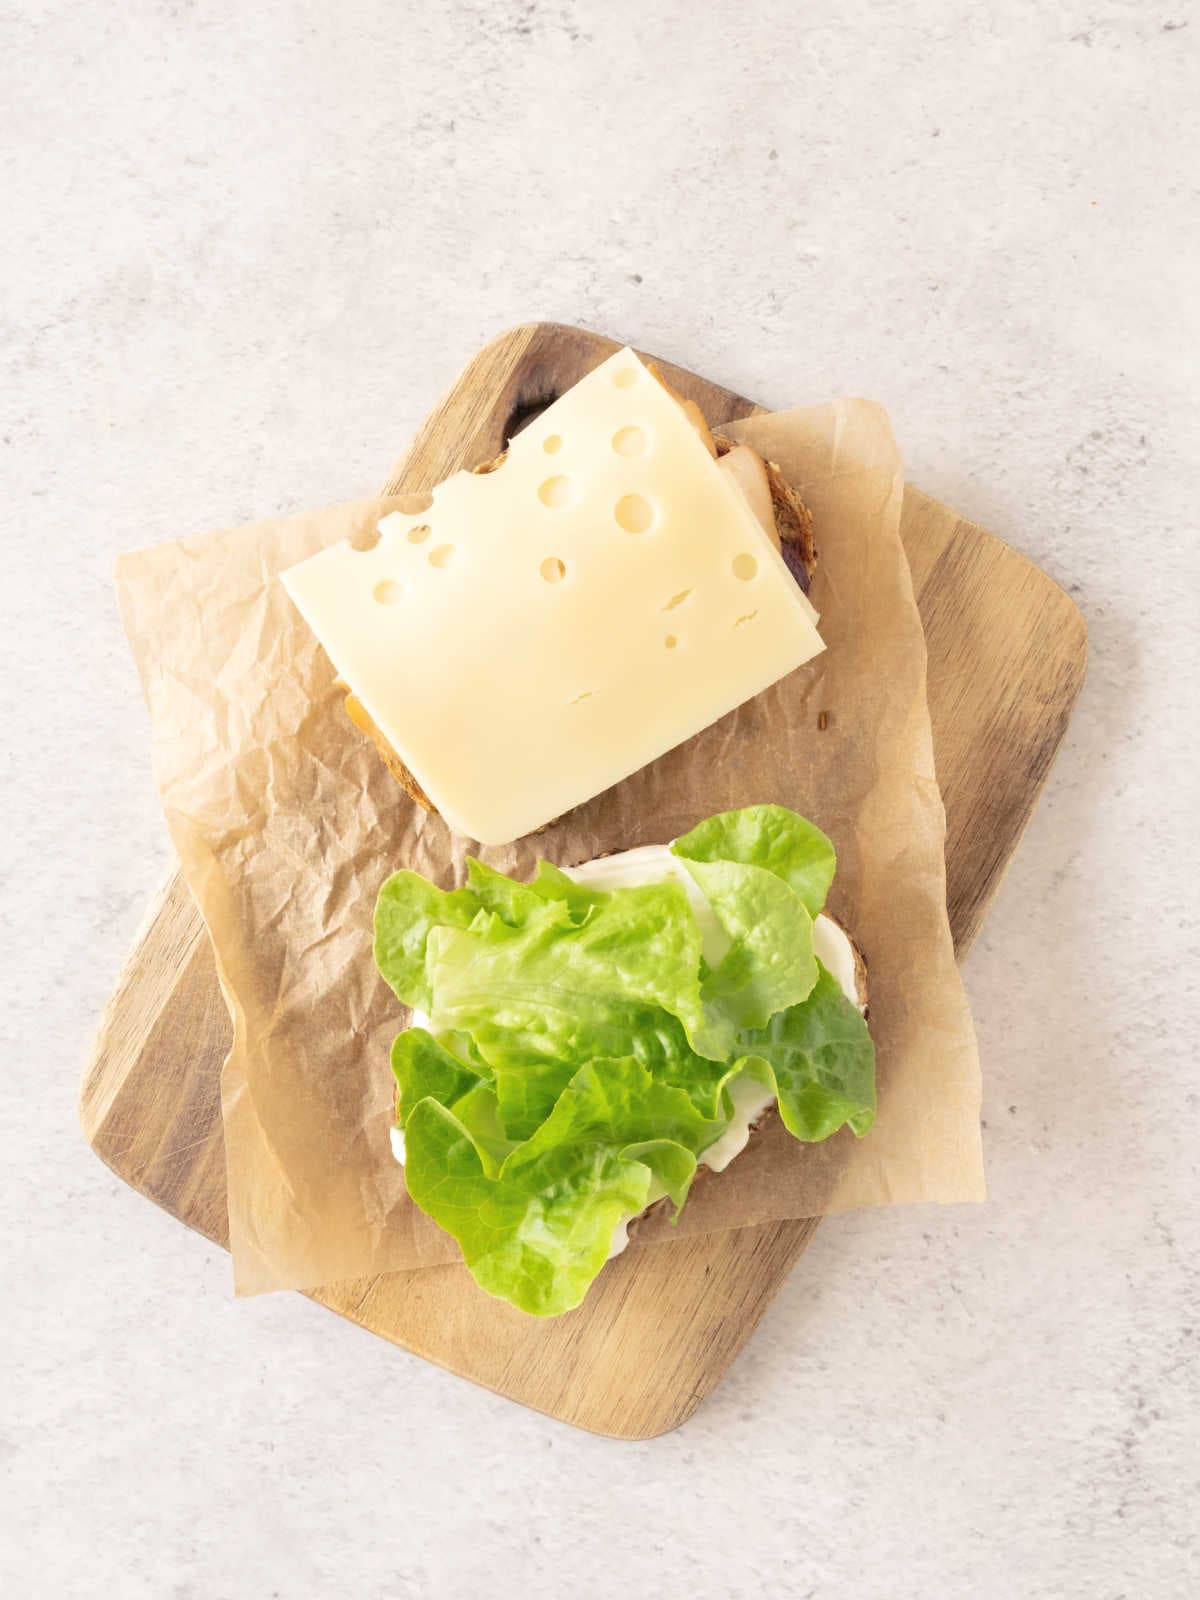 Grey surface with wooden board and sandwich being assembled with cheese and lettuce.